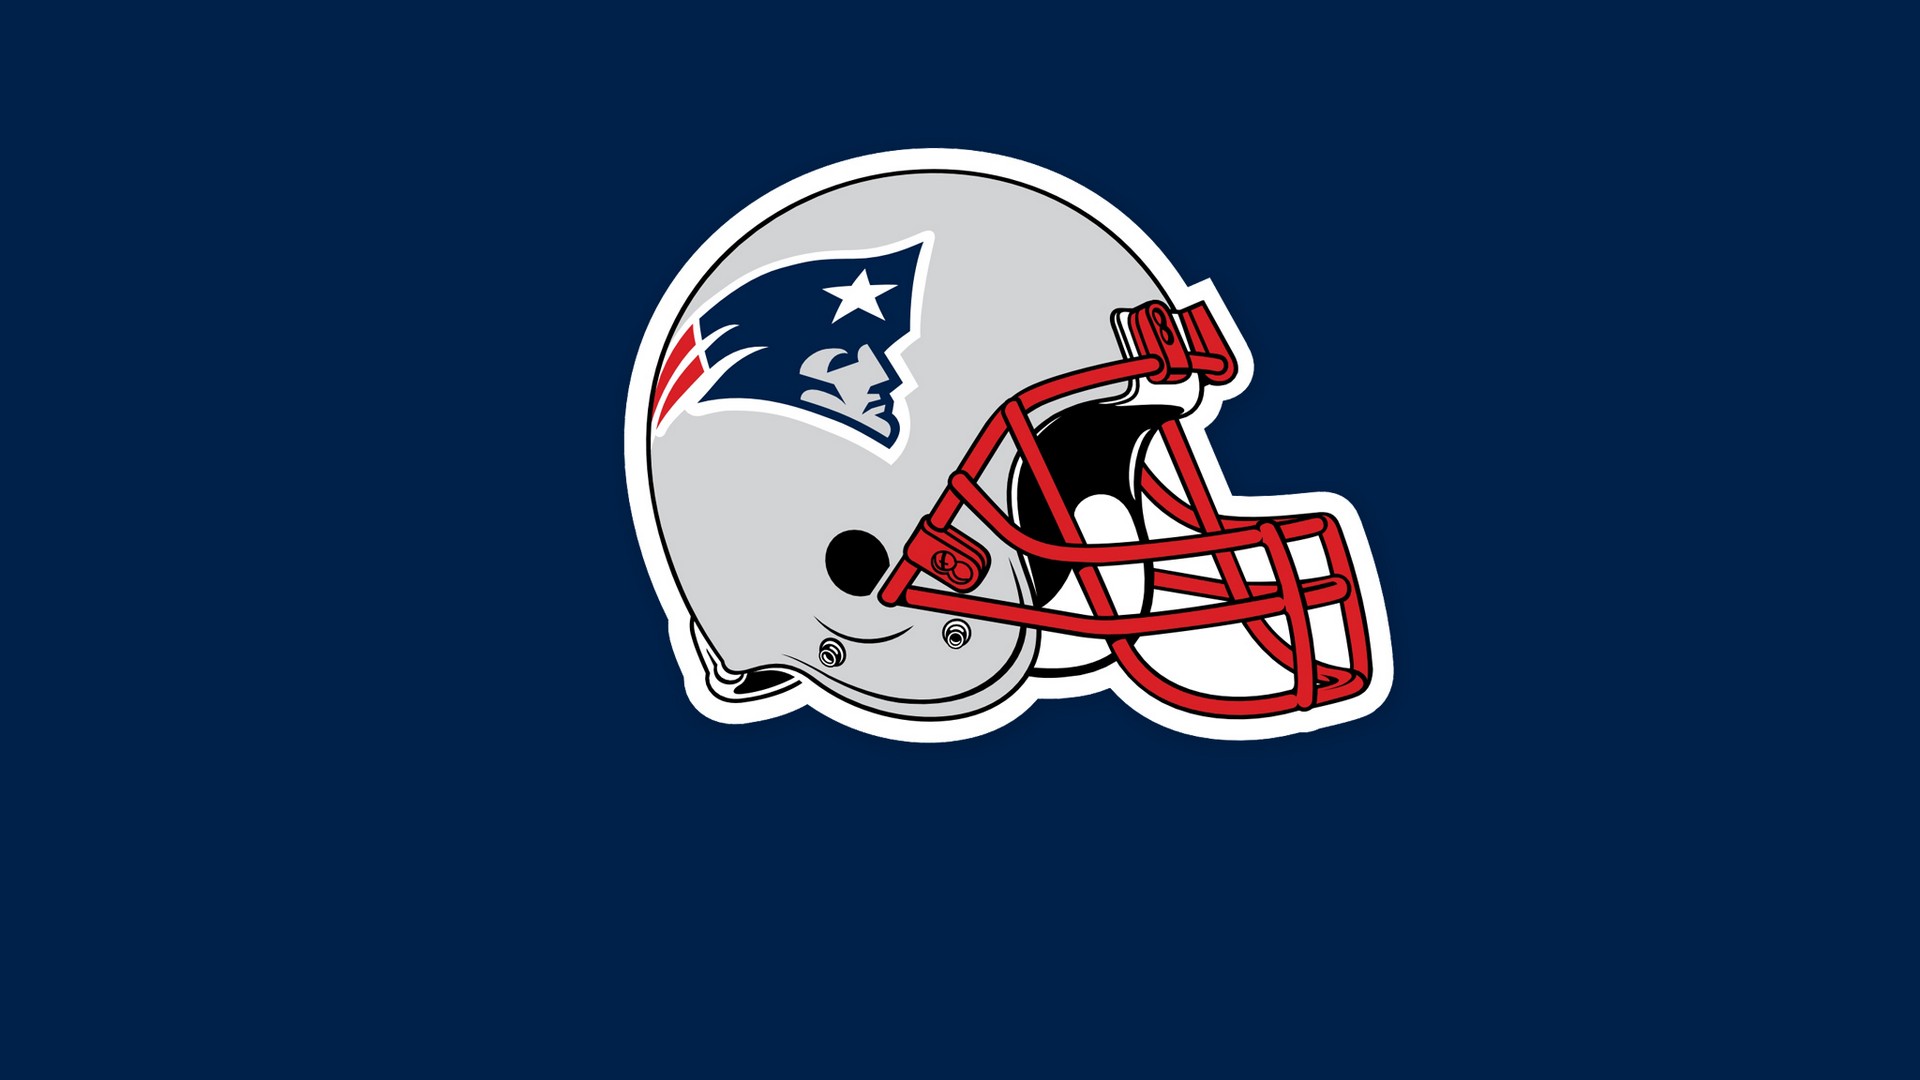 New England Patriots Backgrounds HD With Resolution 1920X1080 pixel. You can make this wallpaper for your Mac or Windows Desktop Background, iPhone, Android or Tablet and another Smartphone device for free